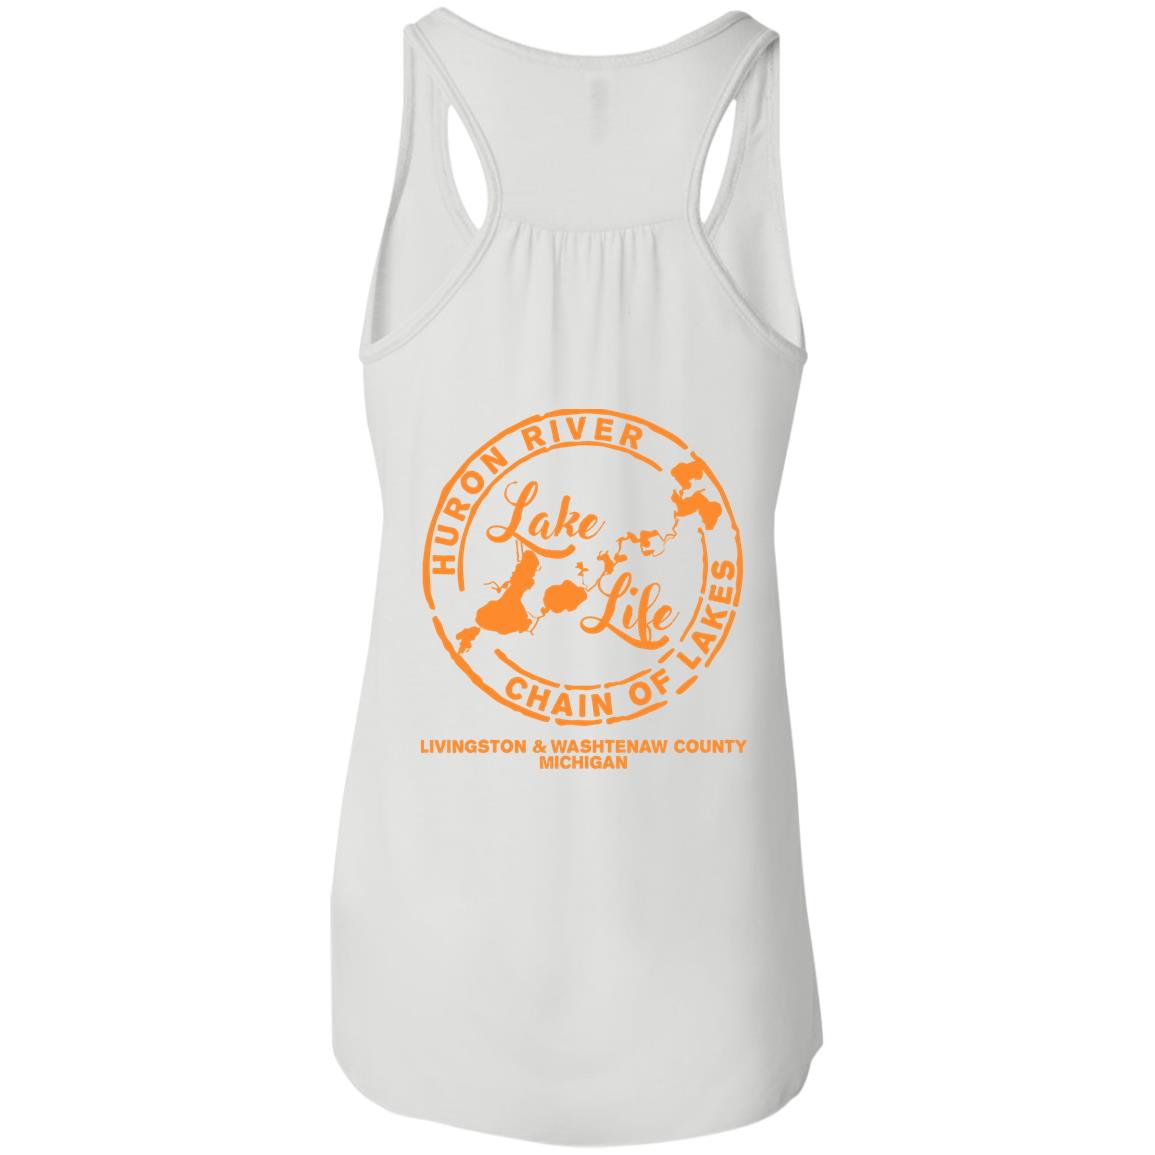 ***2 SIDED***  Life is Better at the Lake HRCL LL 2 Sided B8800 Flowy Racerback Tank